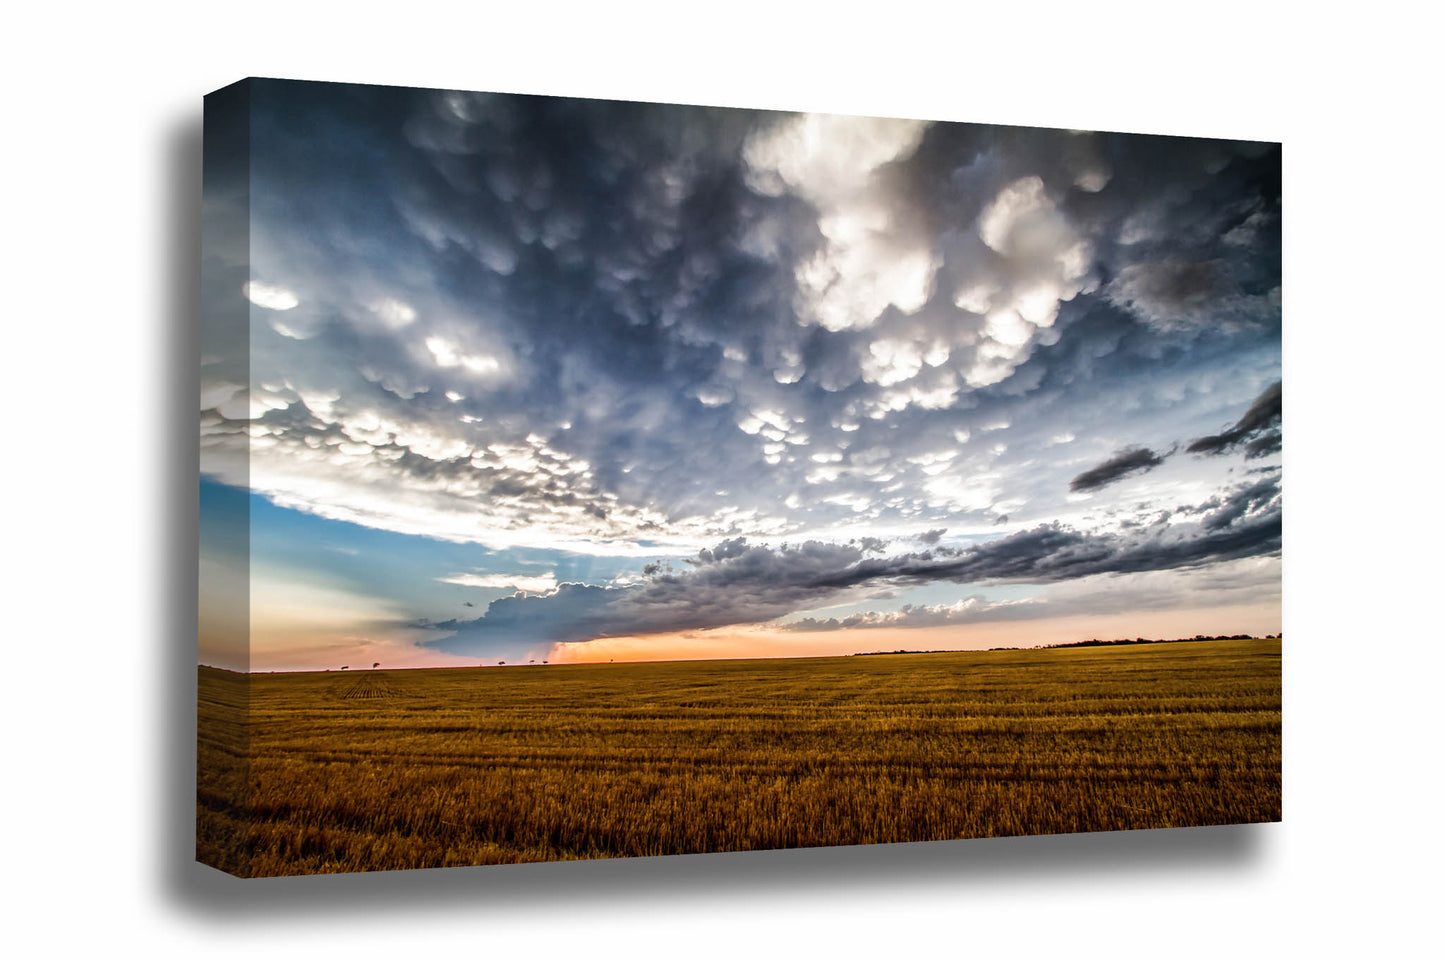 Western plains canvas wall art of a scenic sky over a freshly cut wheat field after a storm day in Texas by Sean Ramsey of Southern Plains Photography.